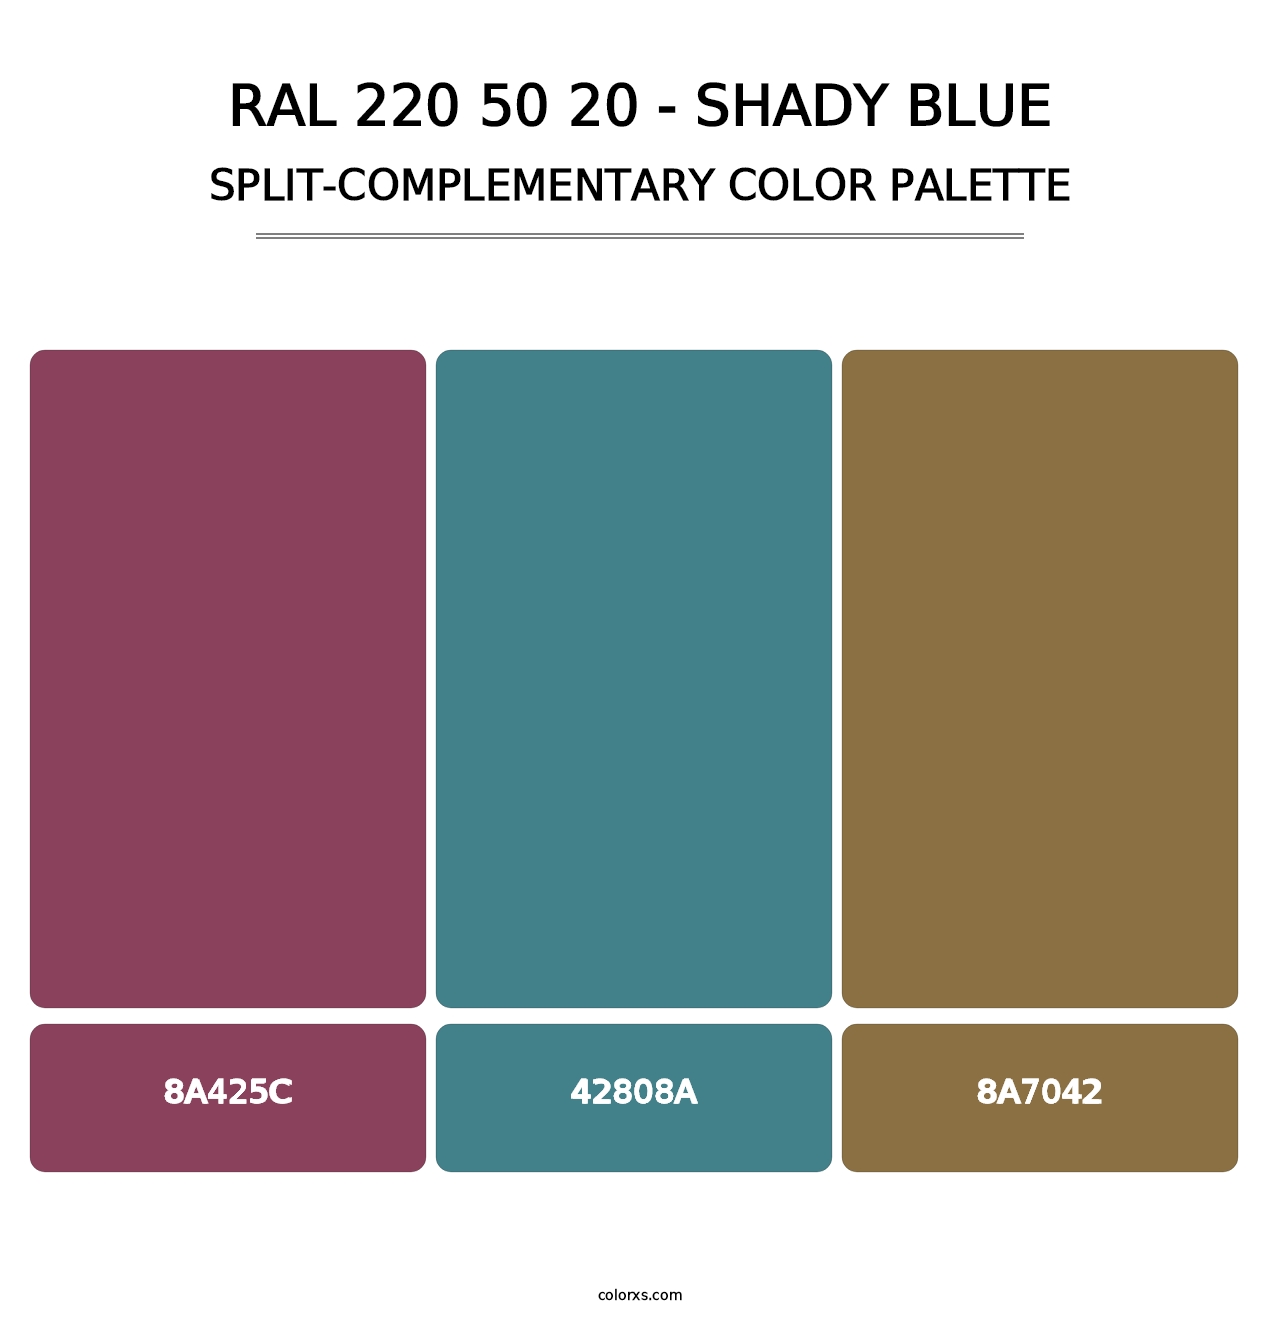 RAL 220 50 20 - Shady Blue - Split-Complementary Color Palette